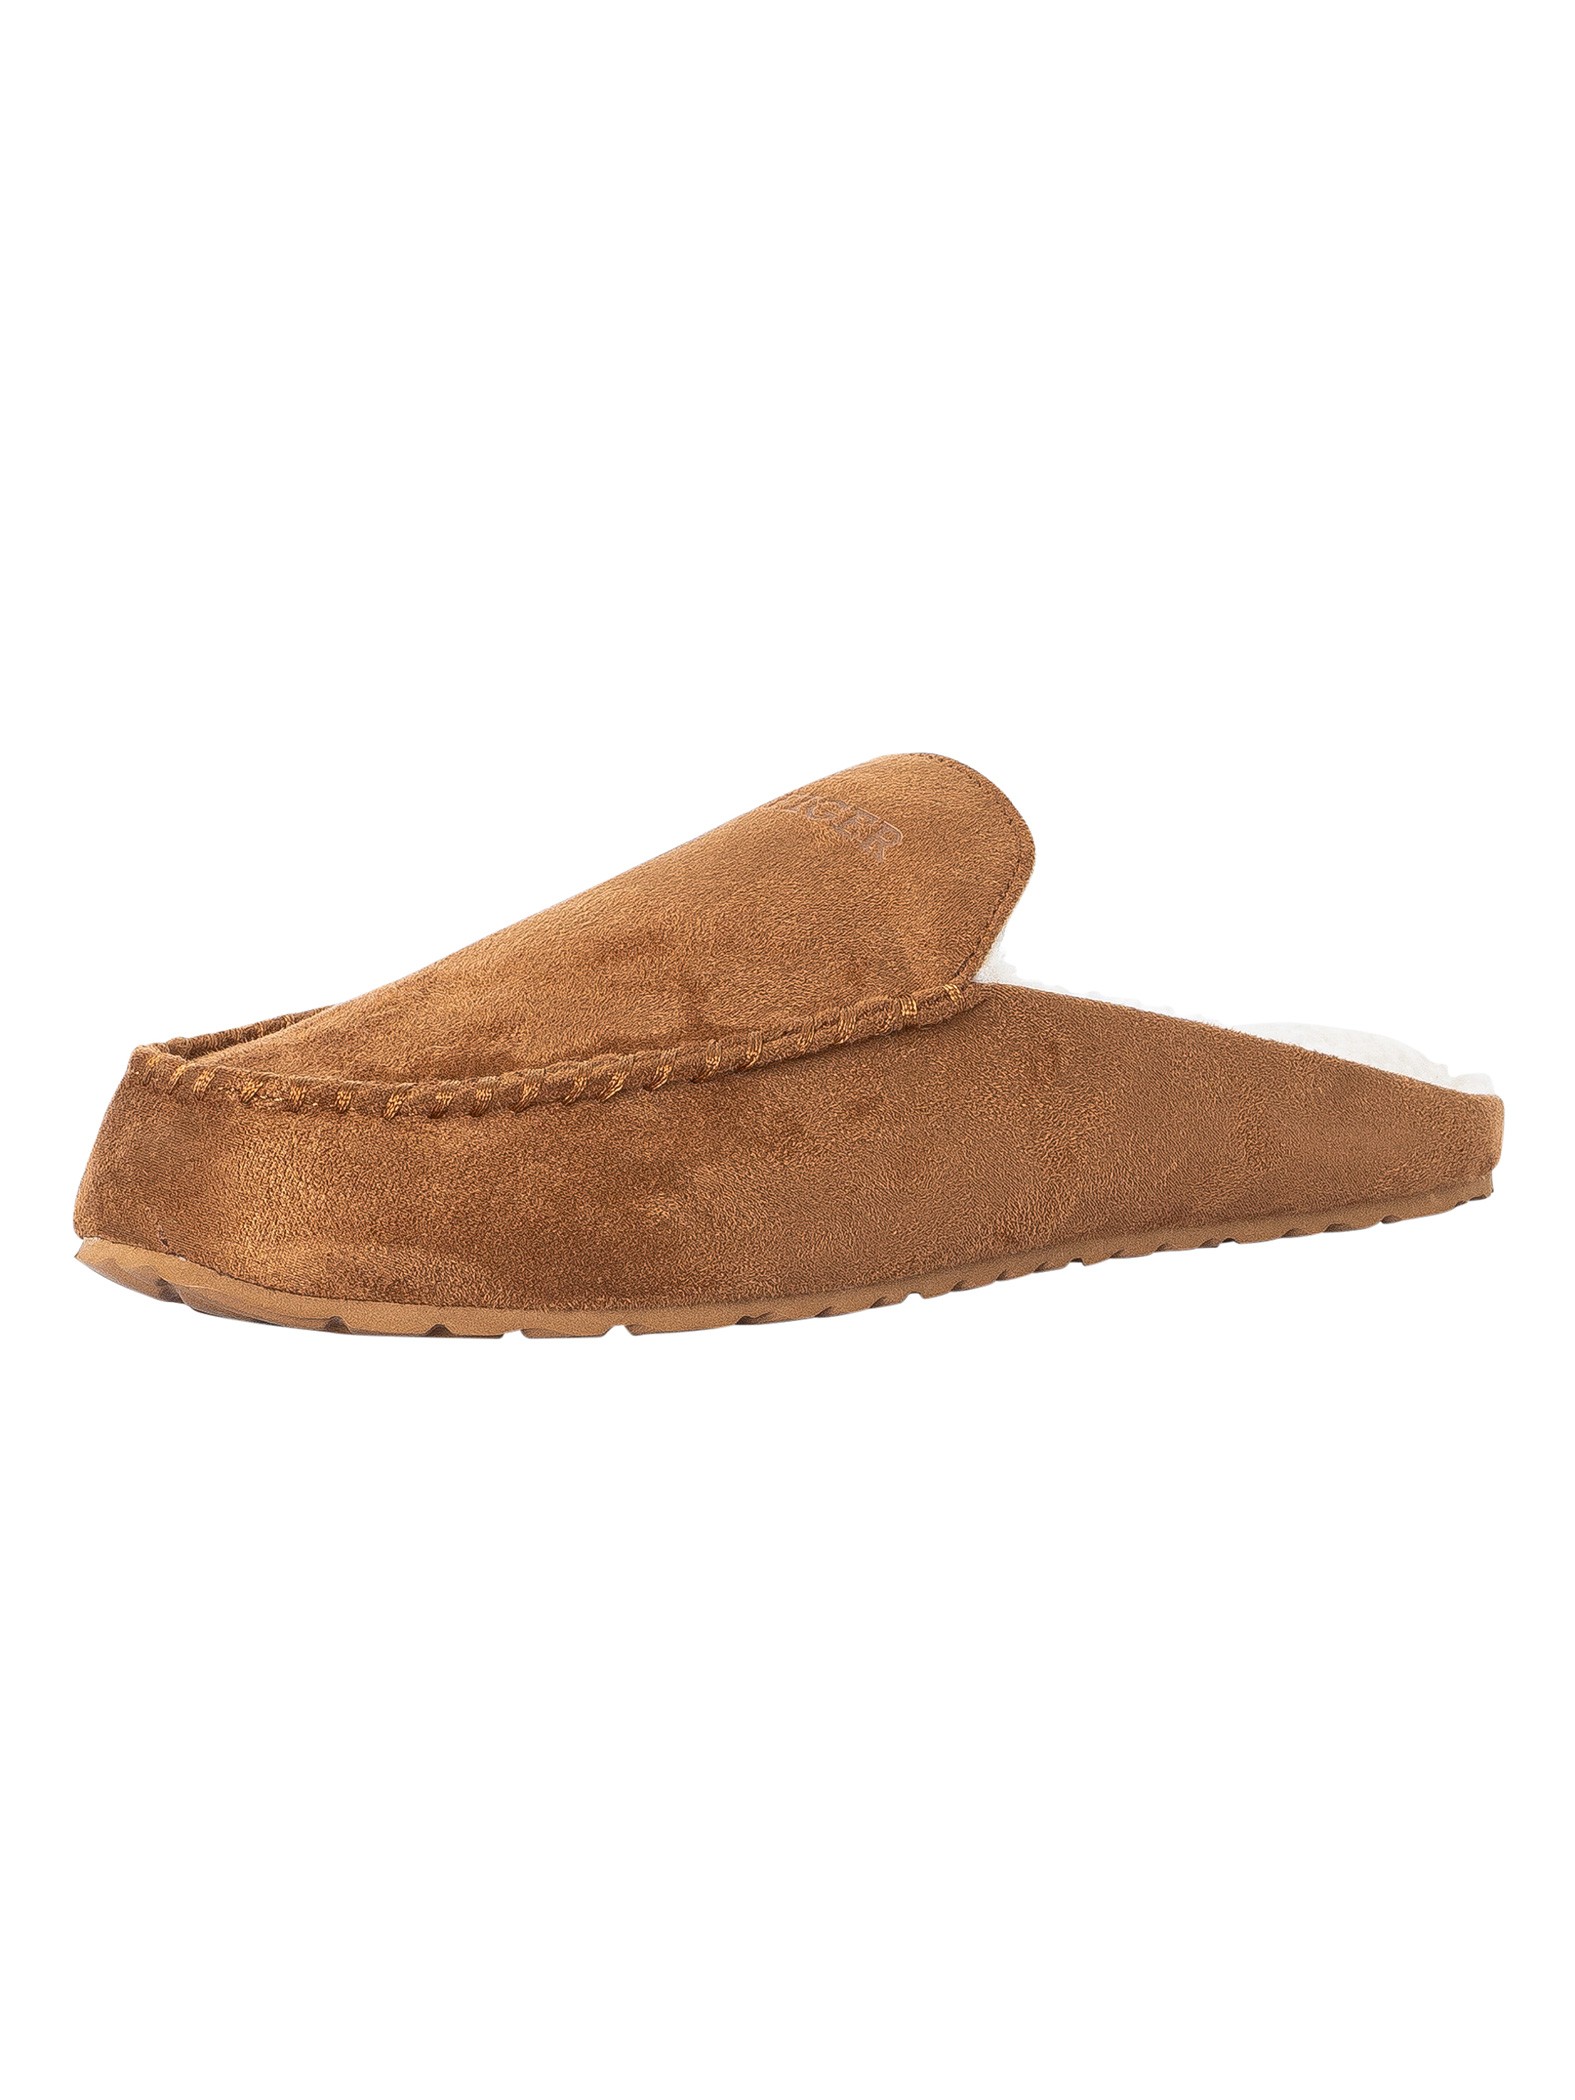 Moccasin Home Slippers